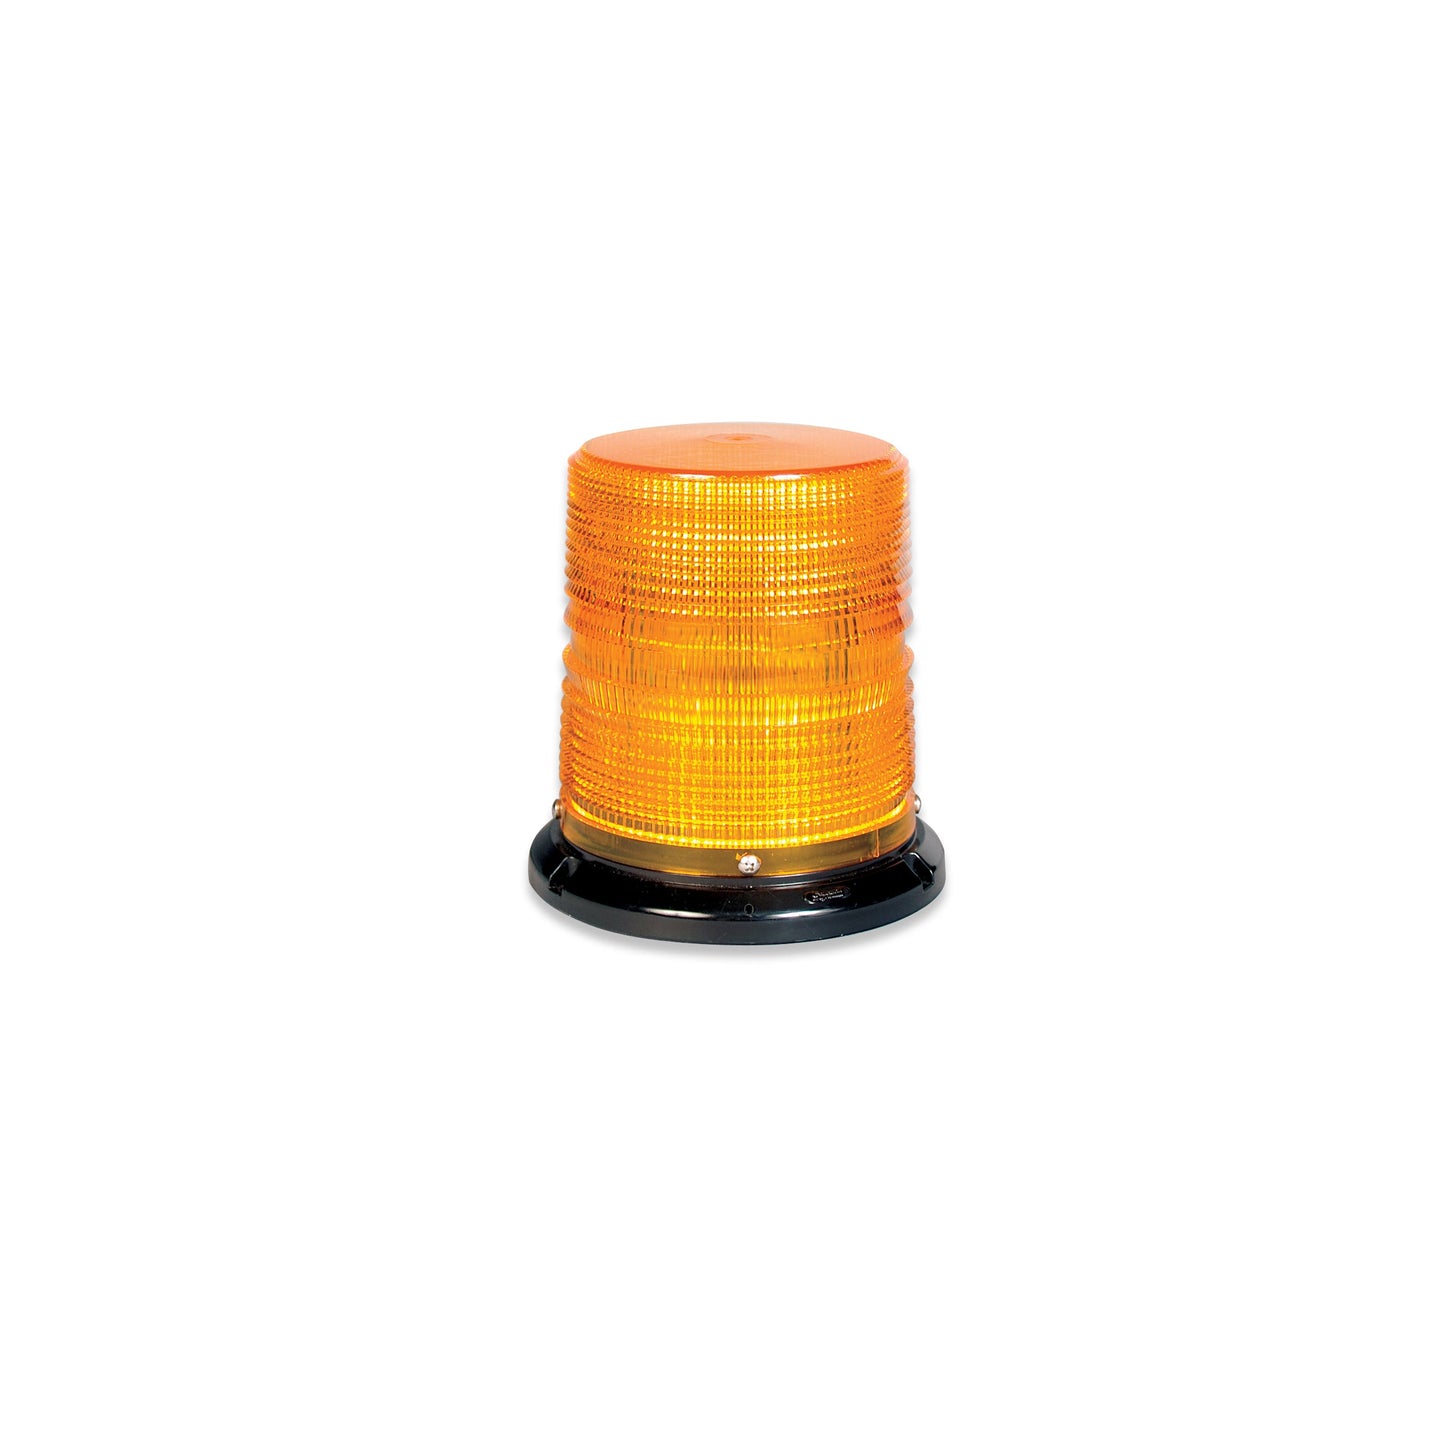 Soundoff Signal ELB45BMH+GC 4500 Series Led Beacon, 10-30V, Sae J845 Class 1 - Magnetic Mount, 6" Clear Dome/ Green Leds